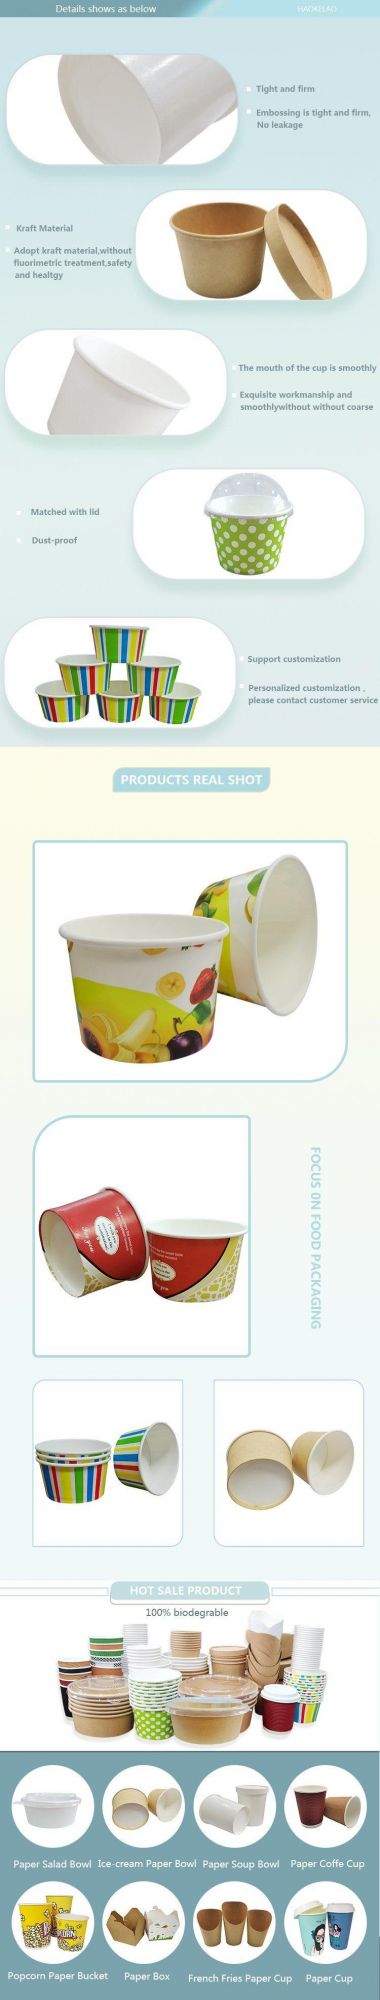 China Factory Customer Printed Wholesale Disposable Food Bowls 390cc Double Coated Kraft Paper Bowl Paper Ice Cream Bowls Cups with Lids